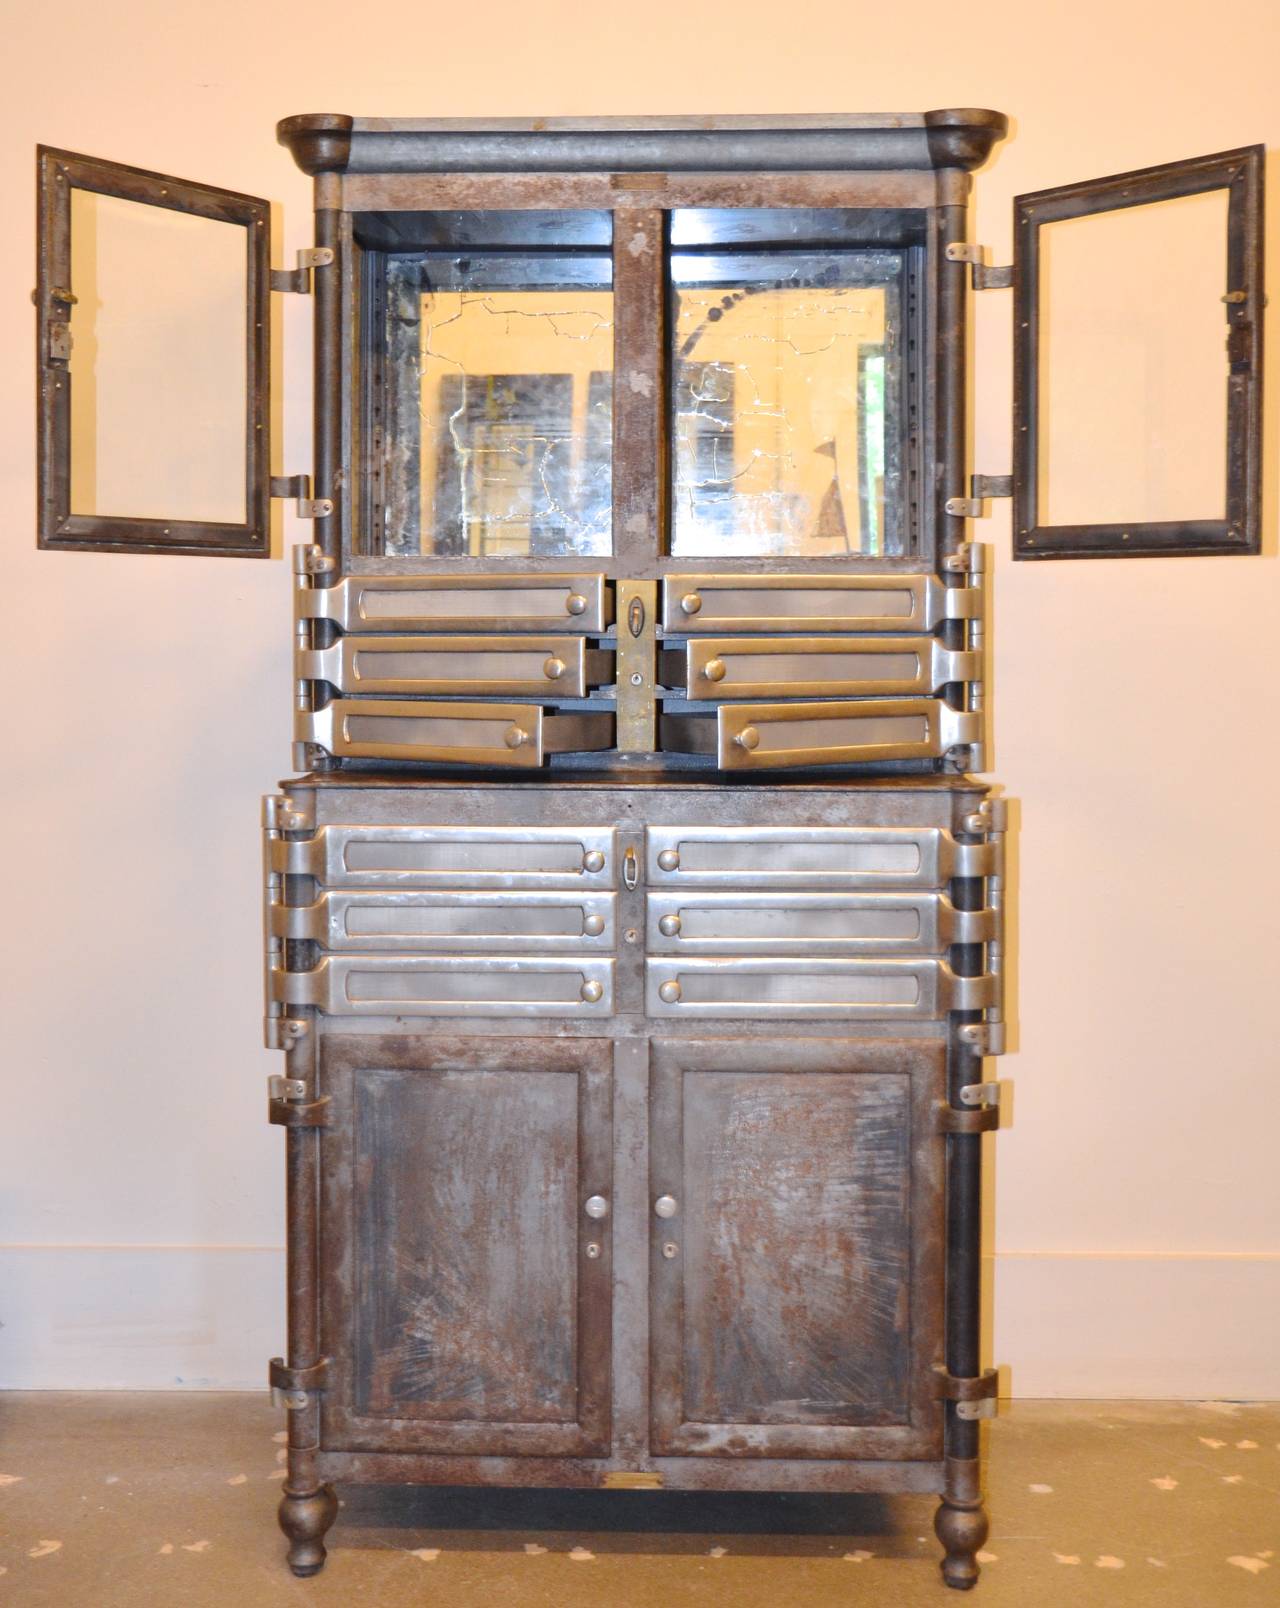 Extraordinary medical cabinet with all operable doors and drawers and original brass latches. The original enamel is stripped, and all steel, brass and nickel is waxed to a subtle sheen. Two lower doors and two upper glass doors with 12 swinging